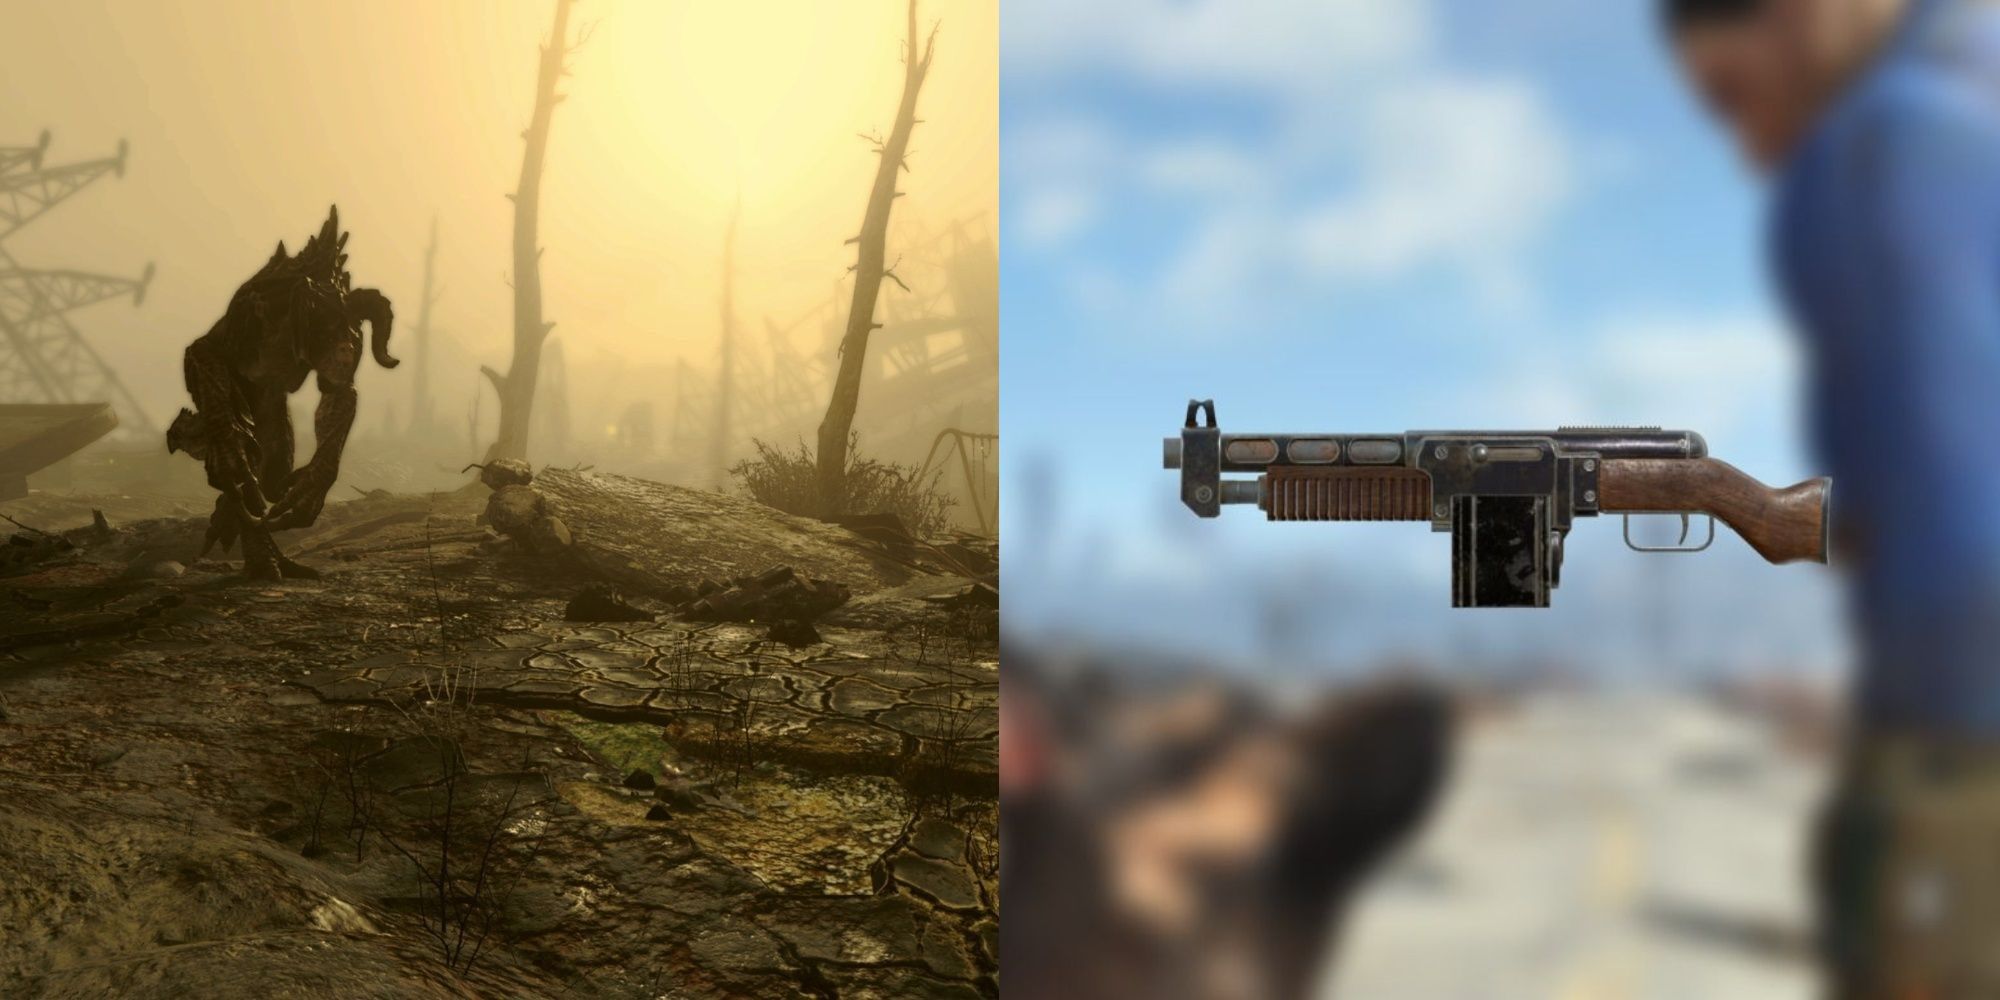 A Deathclaw and a Shotgun in Fallout 4